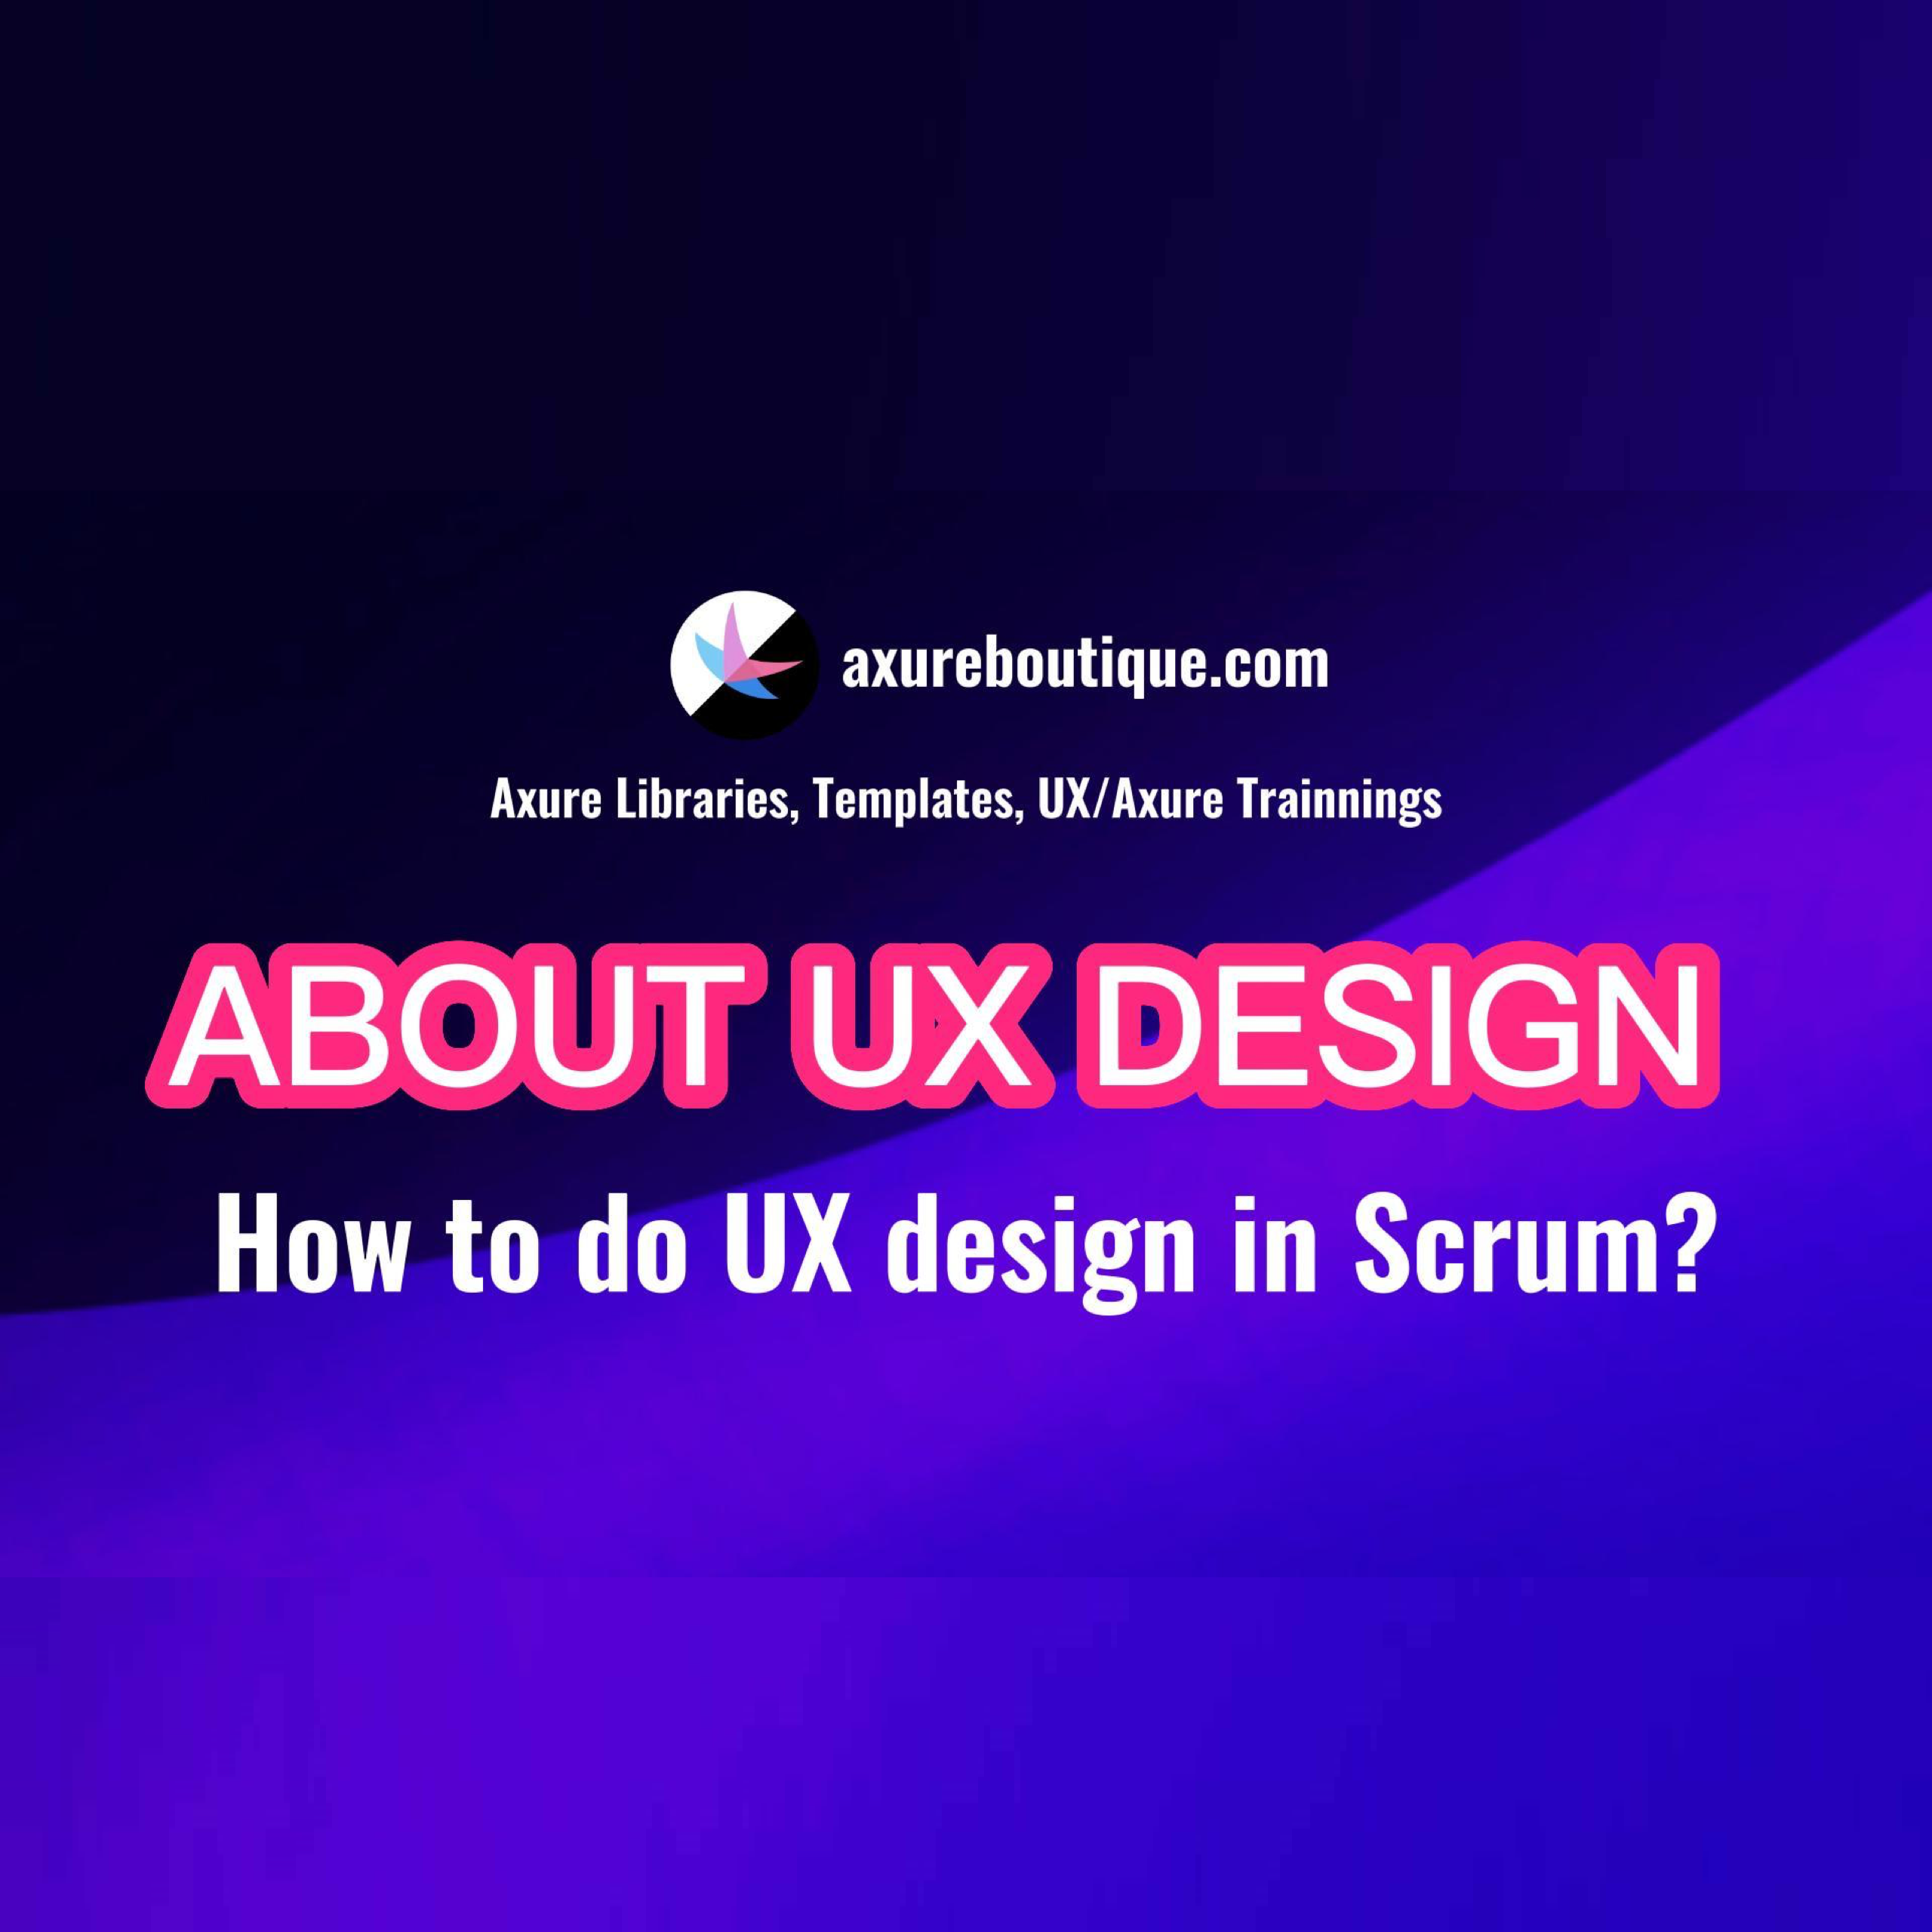 About UX Design: What to do UX design in Scrum? – AxureBoutique